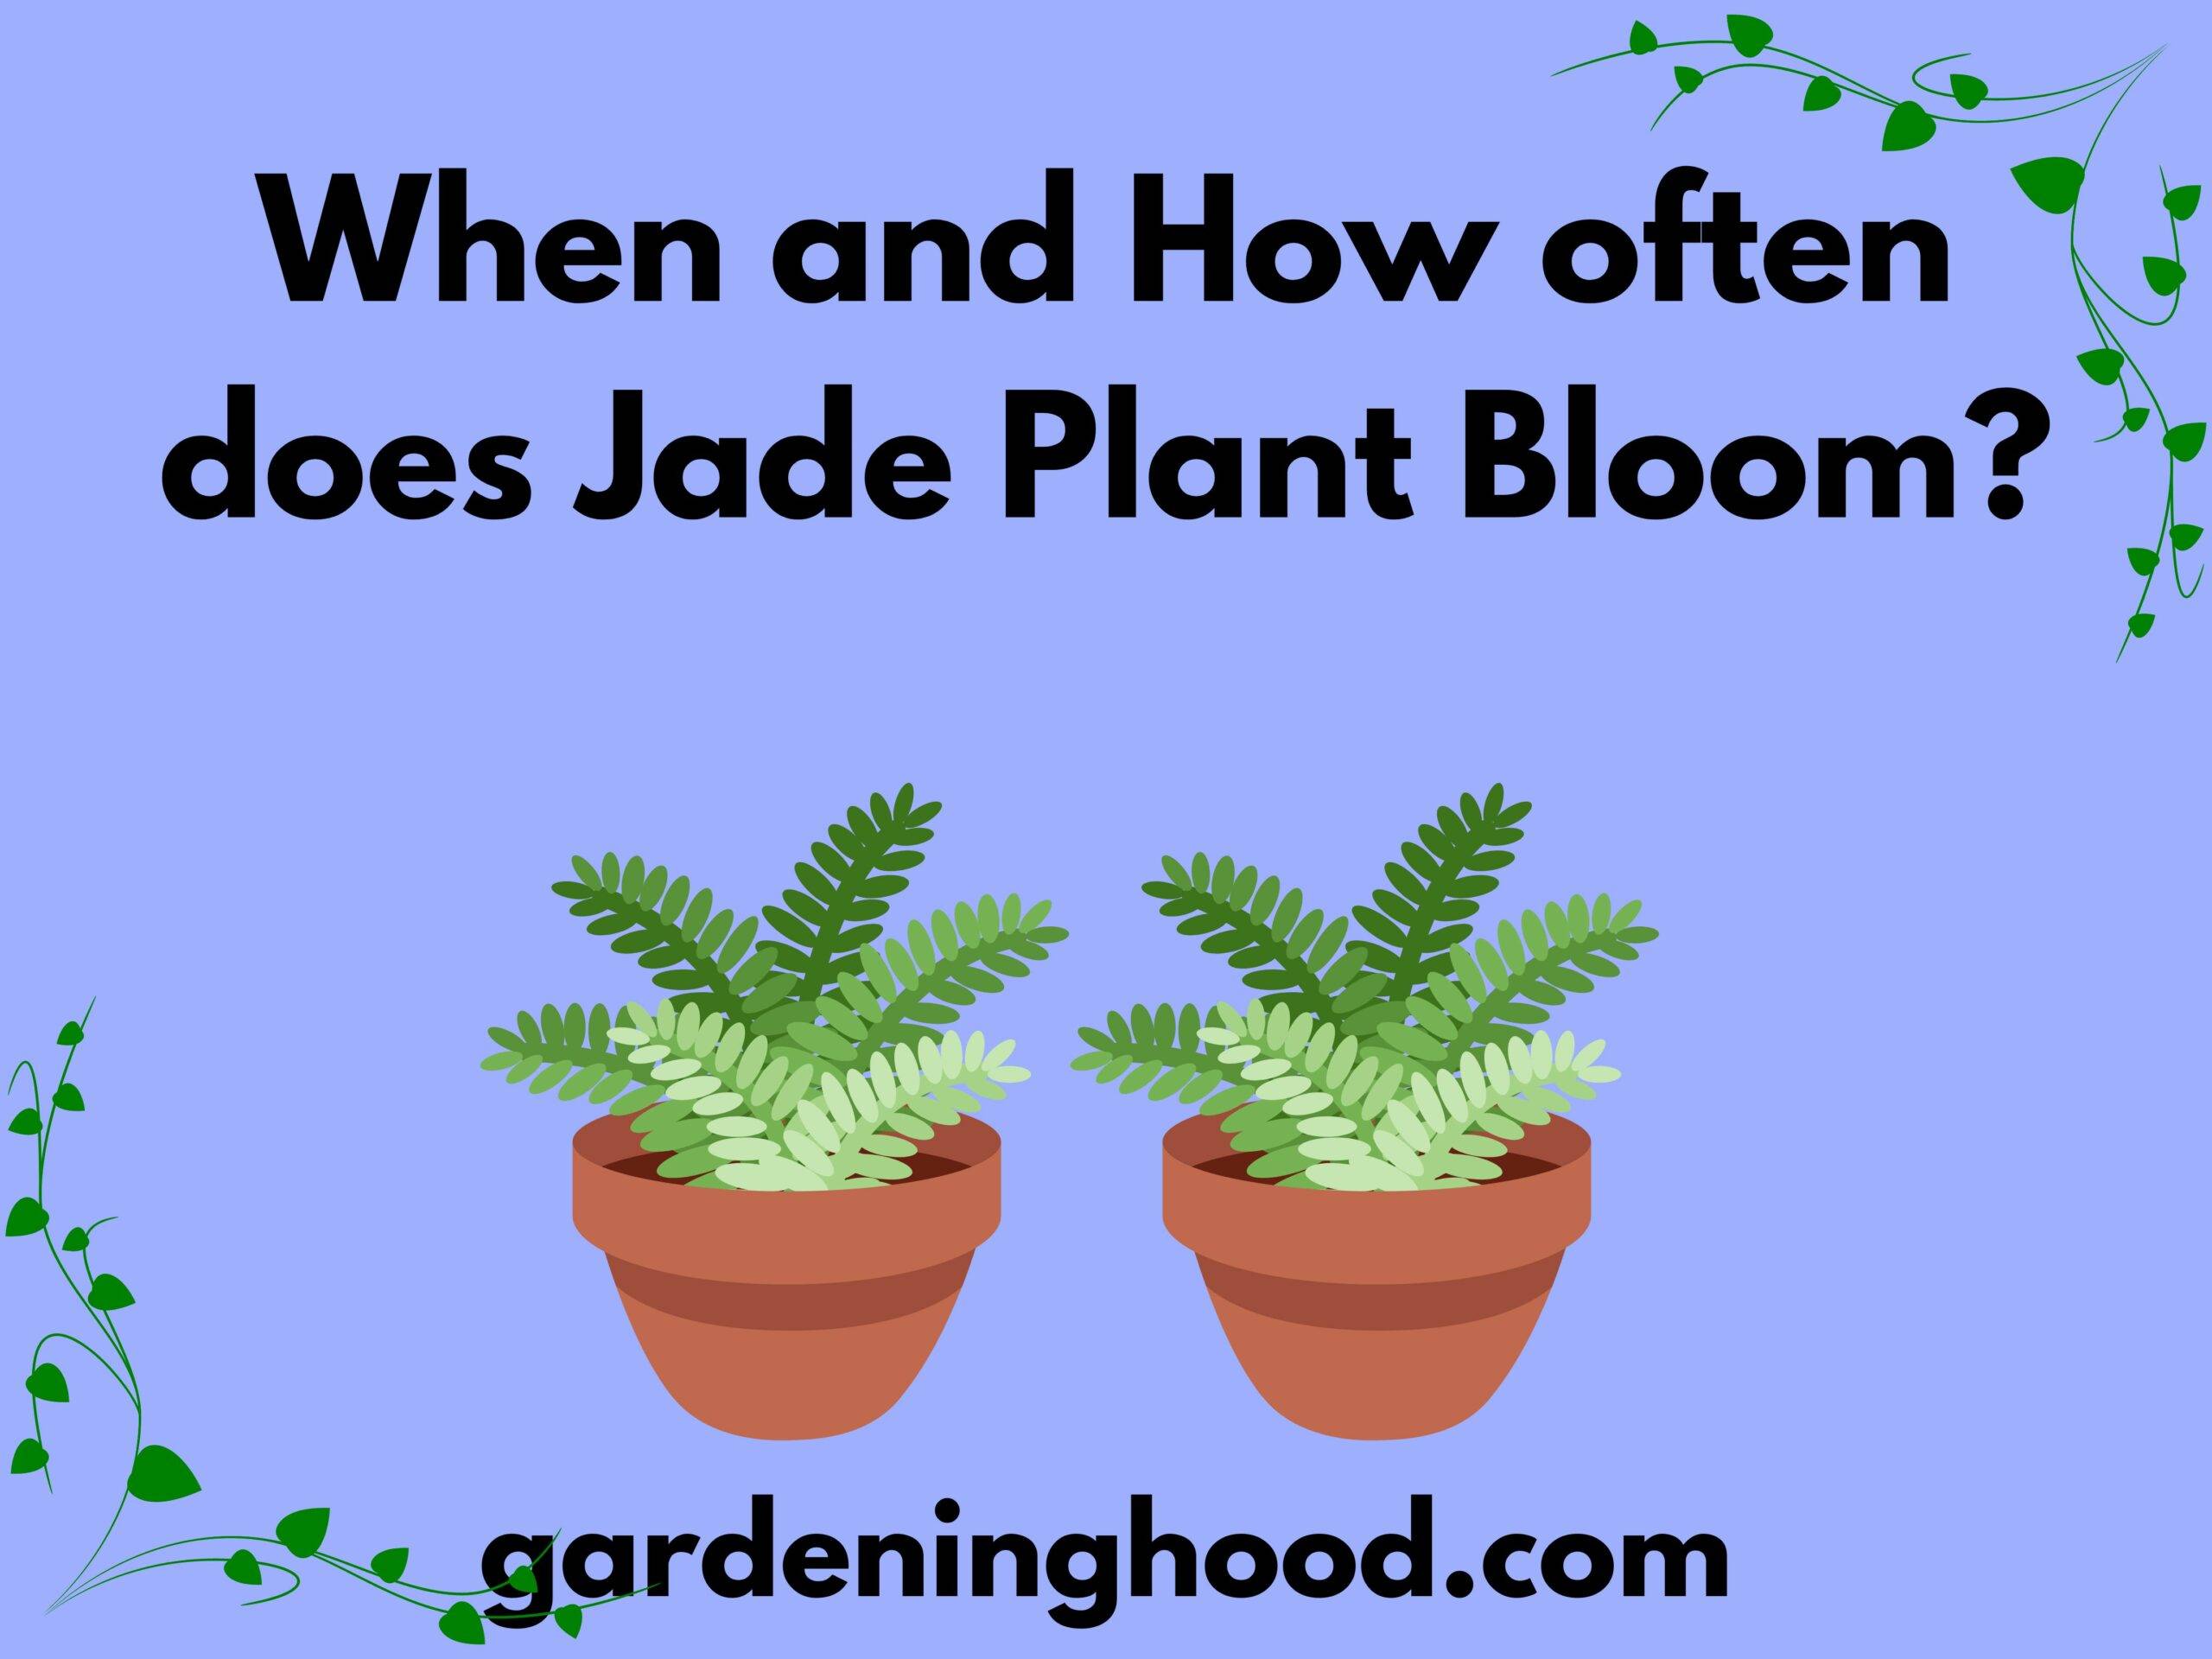 When and How often does Jade Plant Bloom?